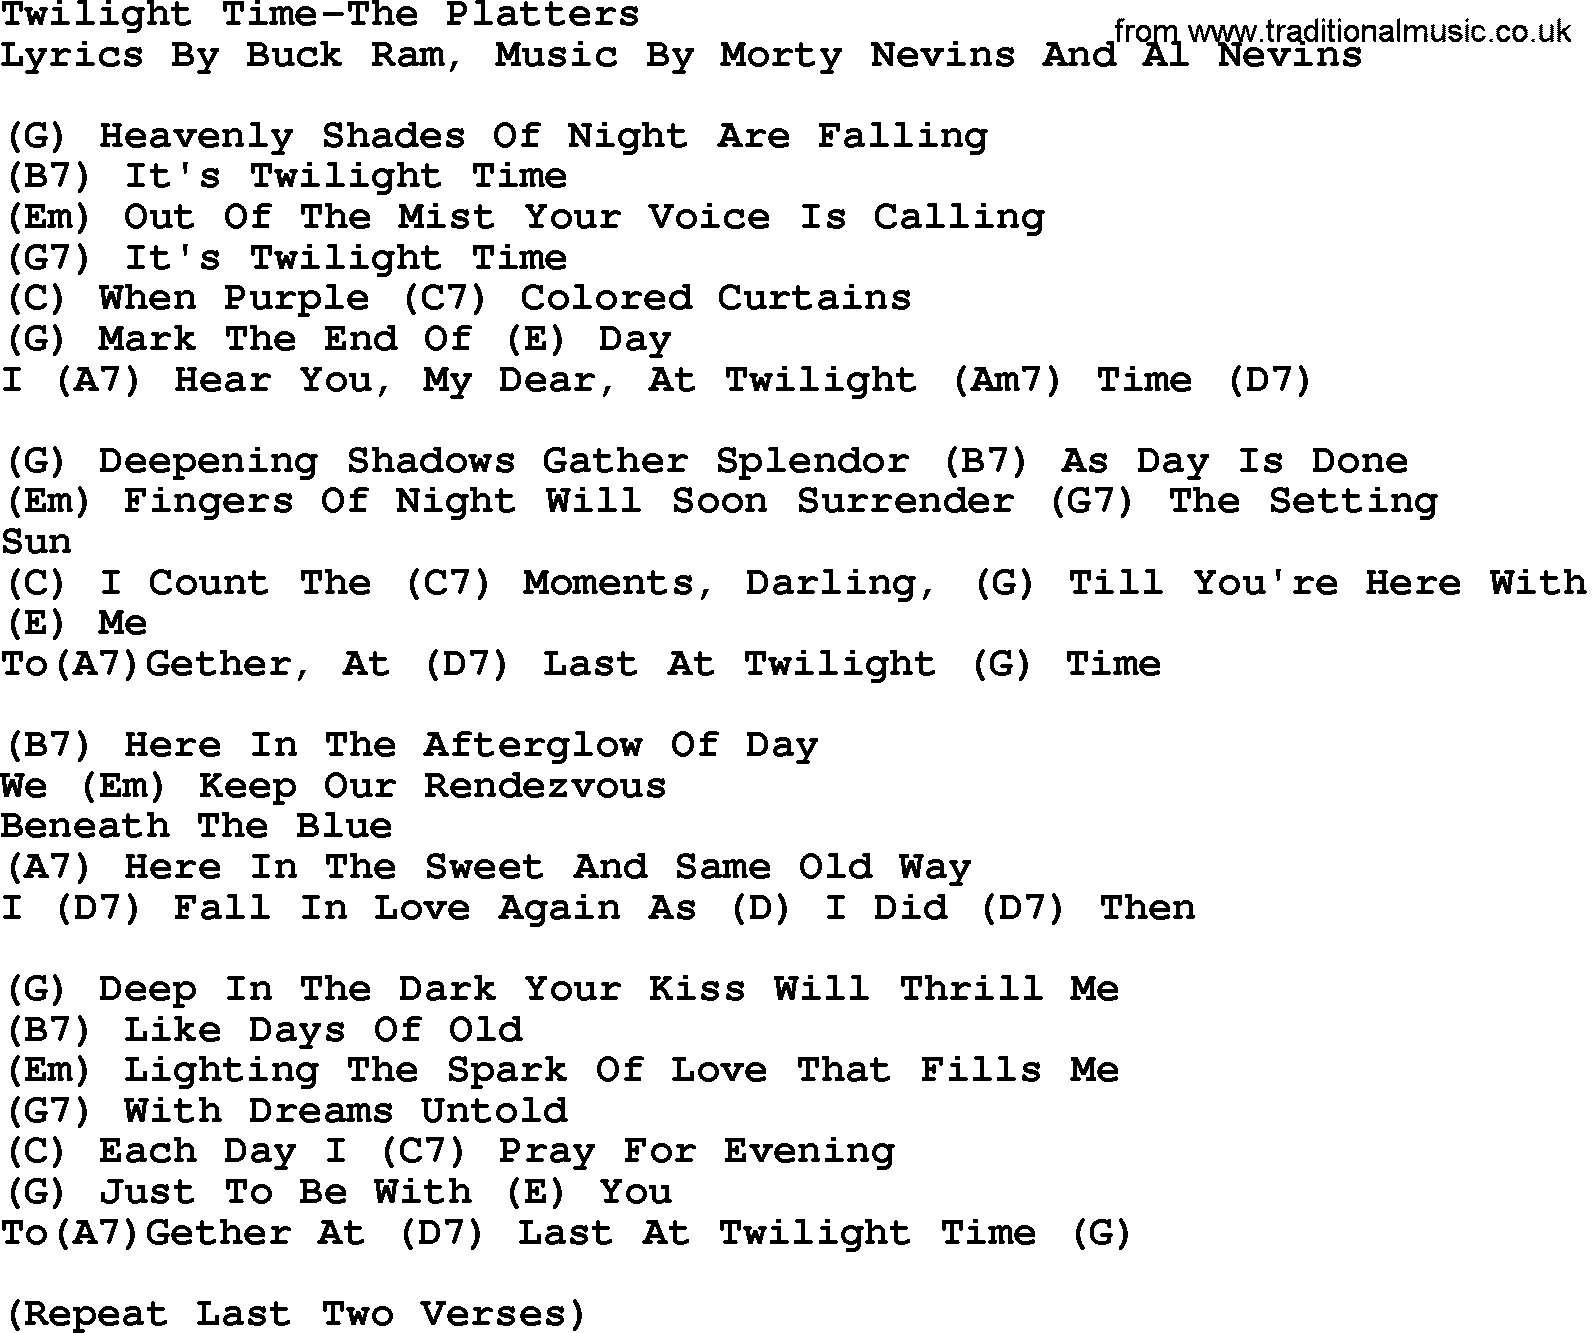 Country music song: Twilight Time-The Platters lyrics and chords